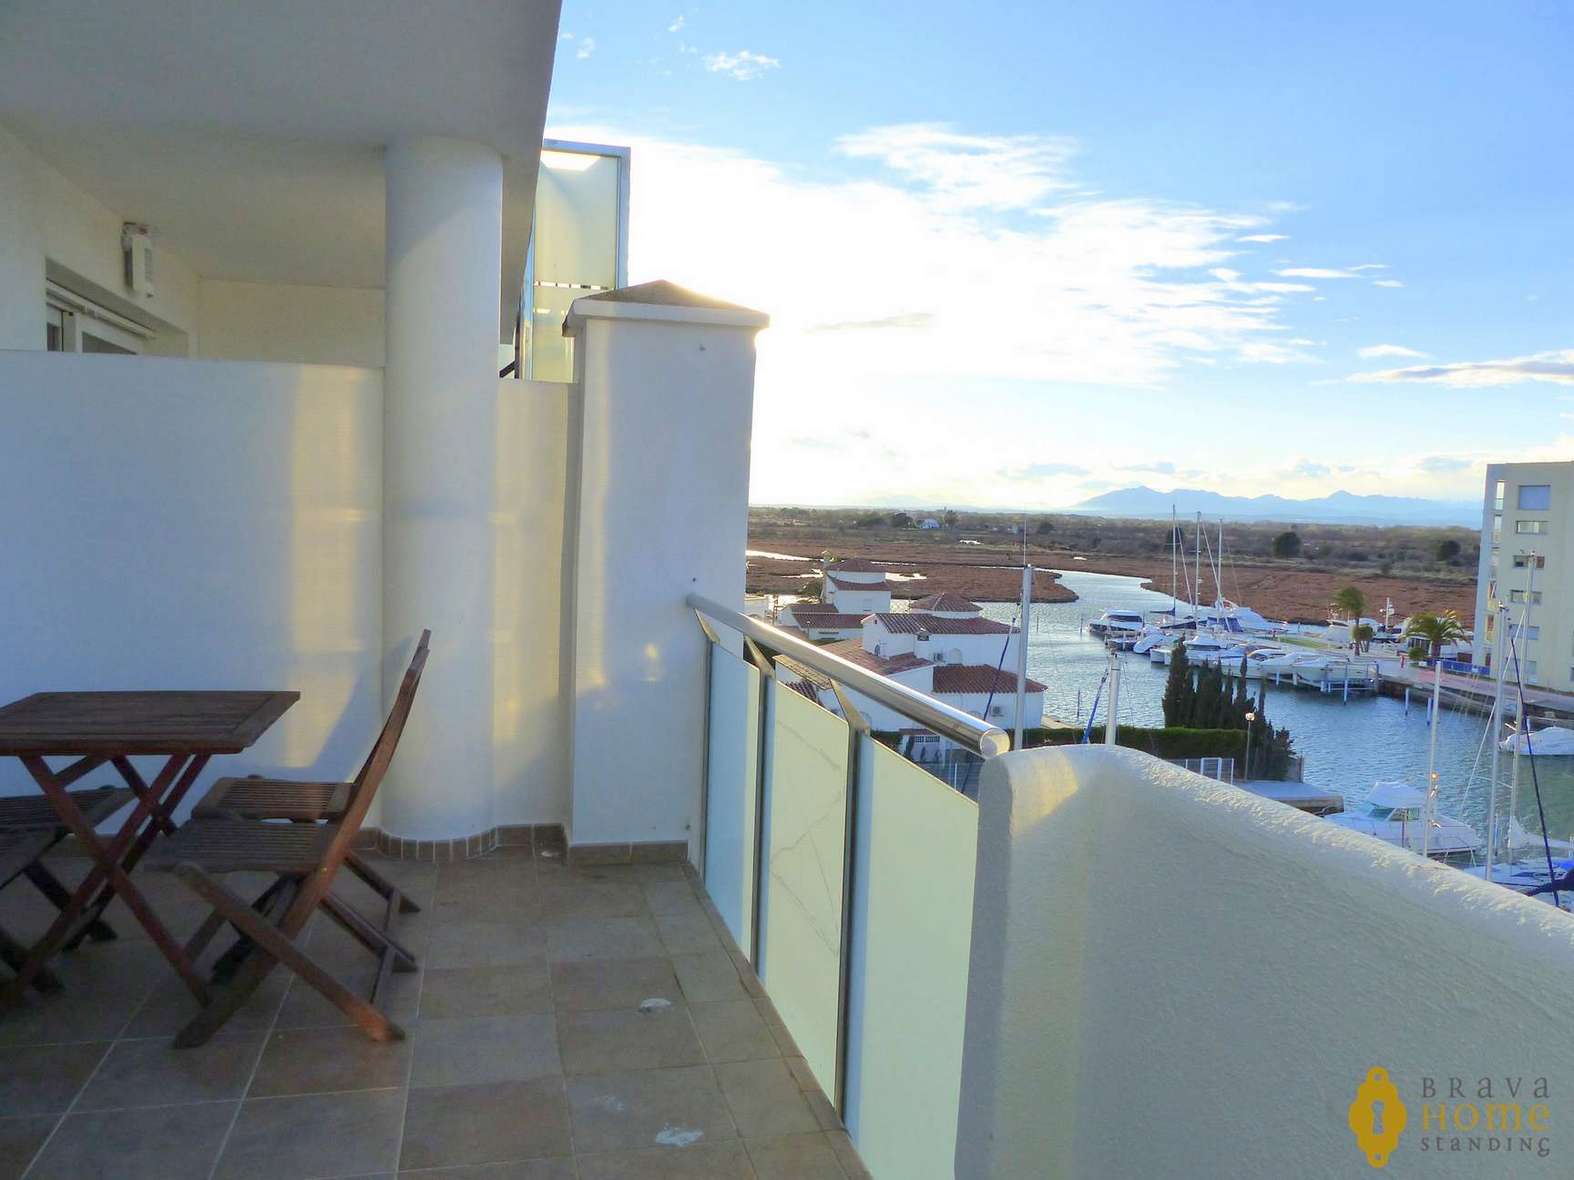 Top floor apartment with views over the canal for sale in Rosas - Santa Margarita